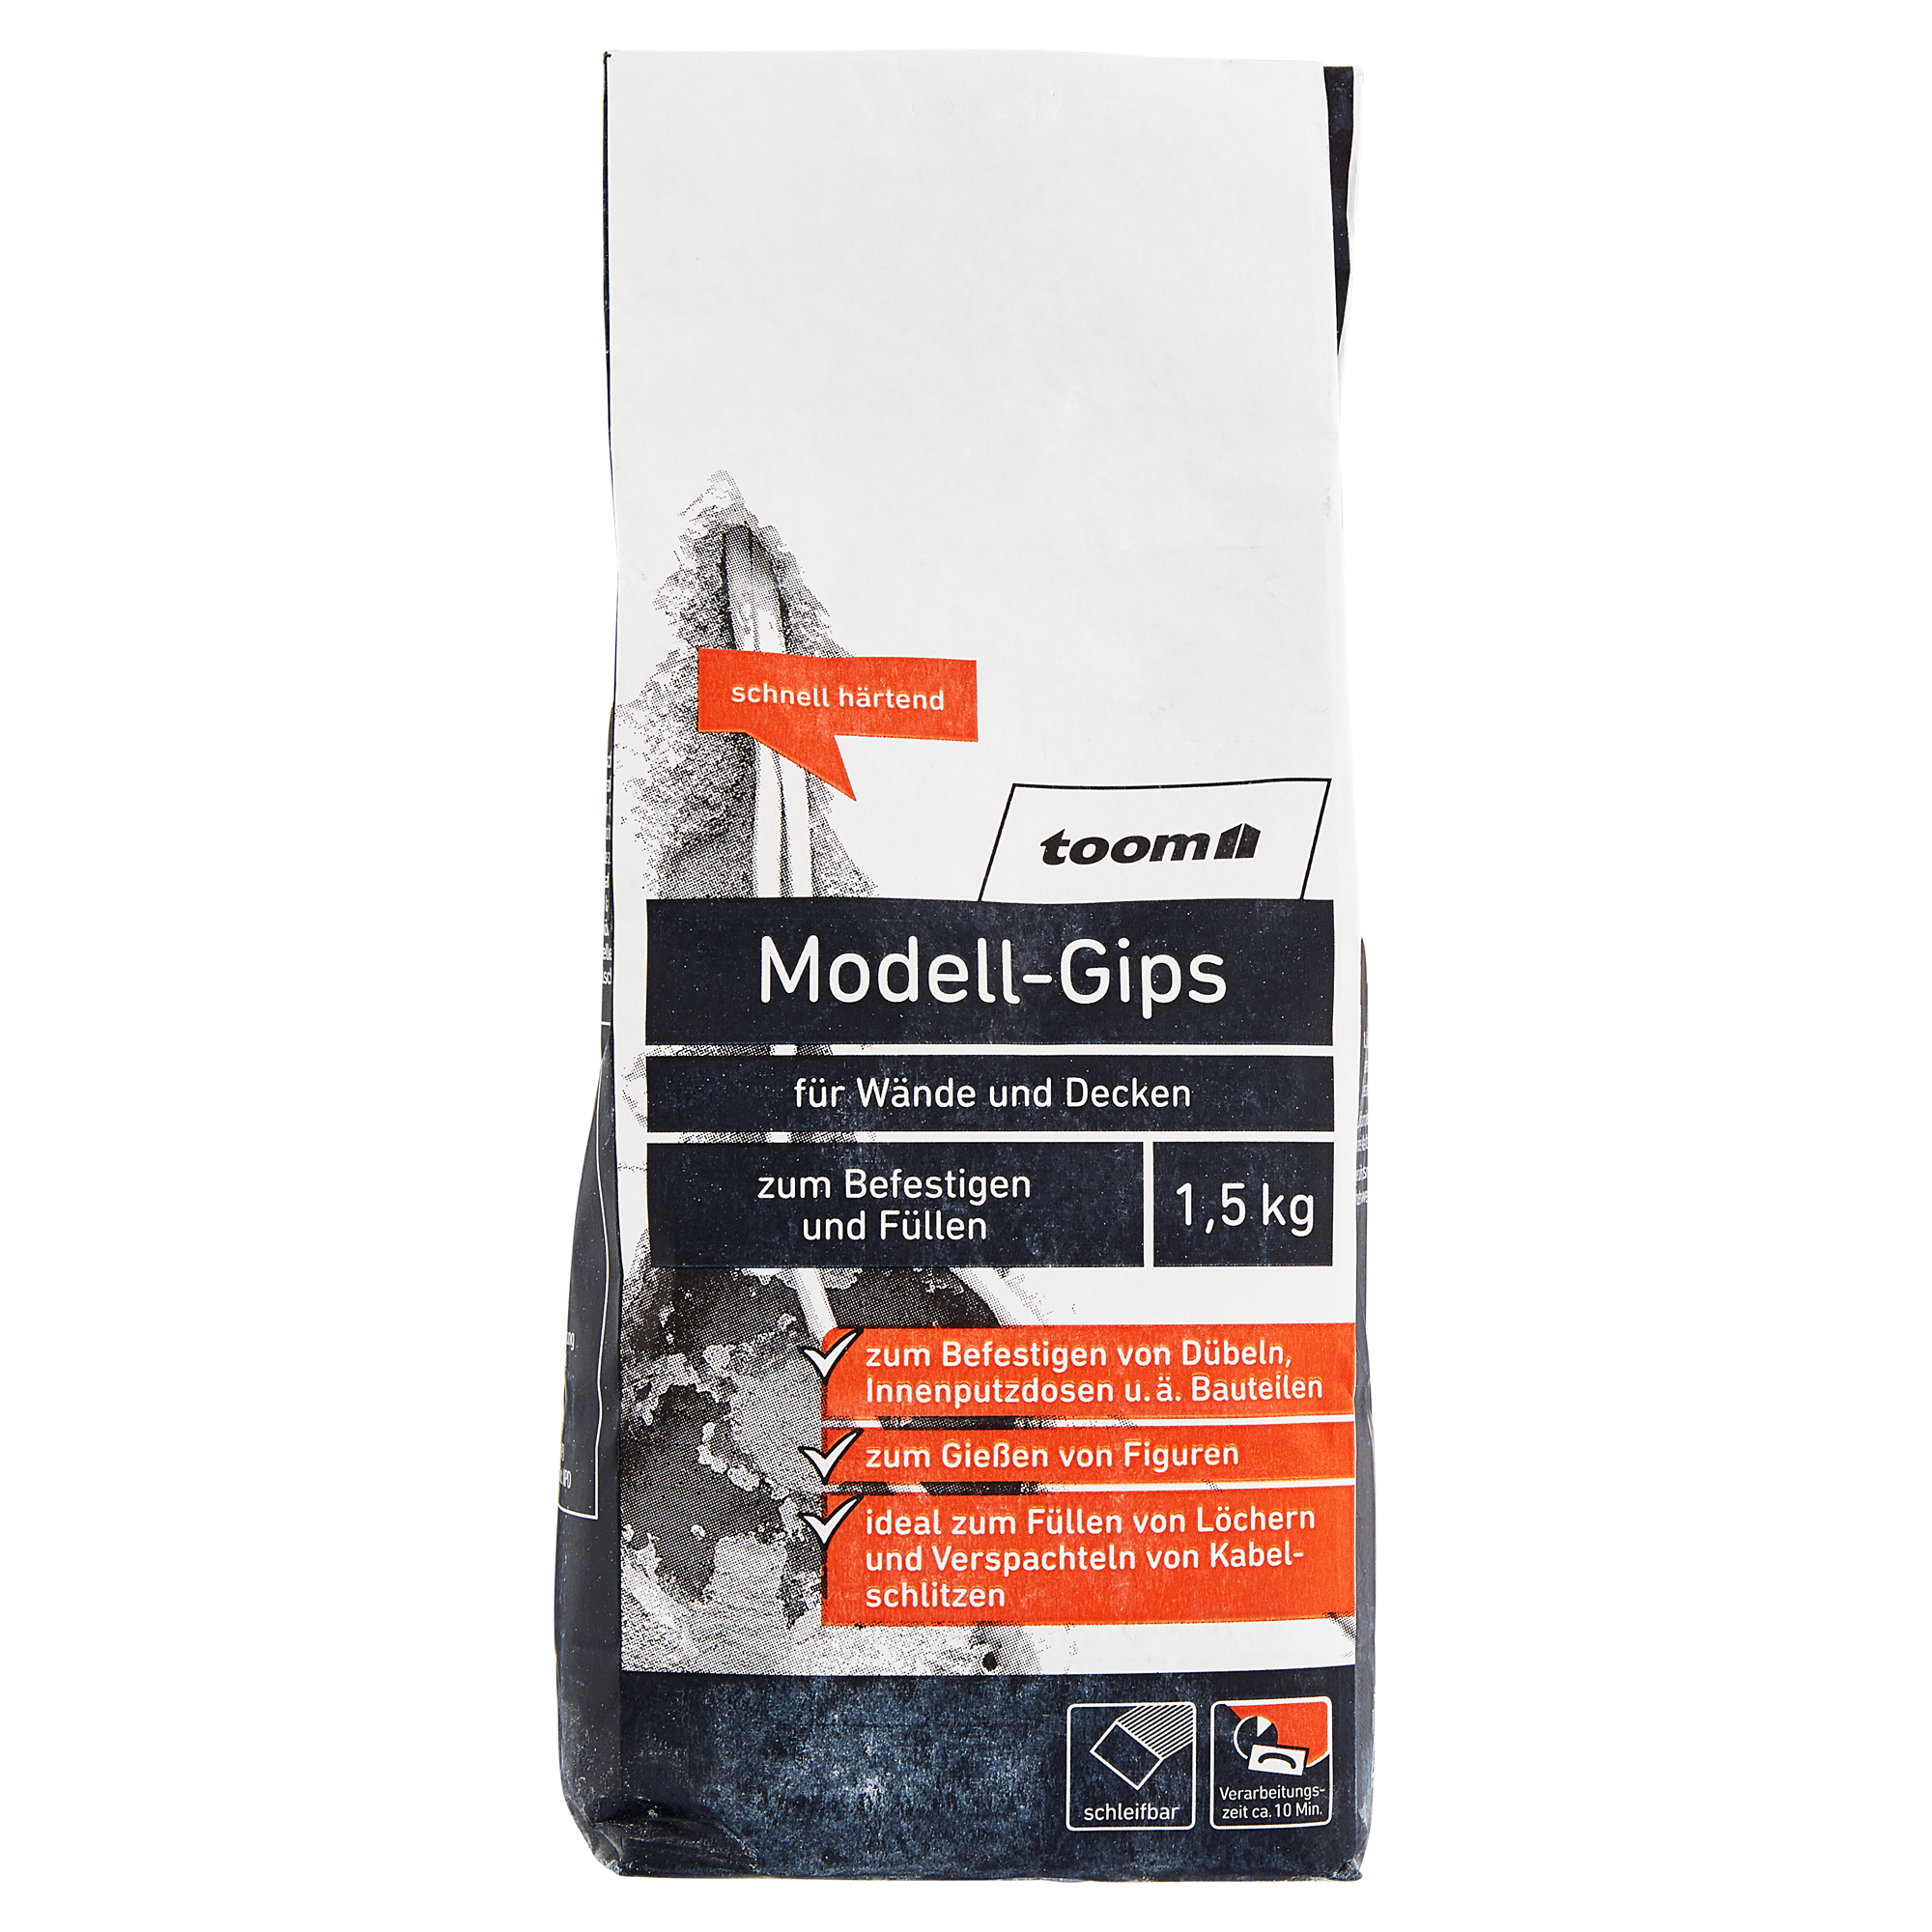 Modell-Gips 1,5 kg + product picture